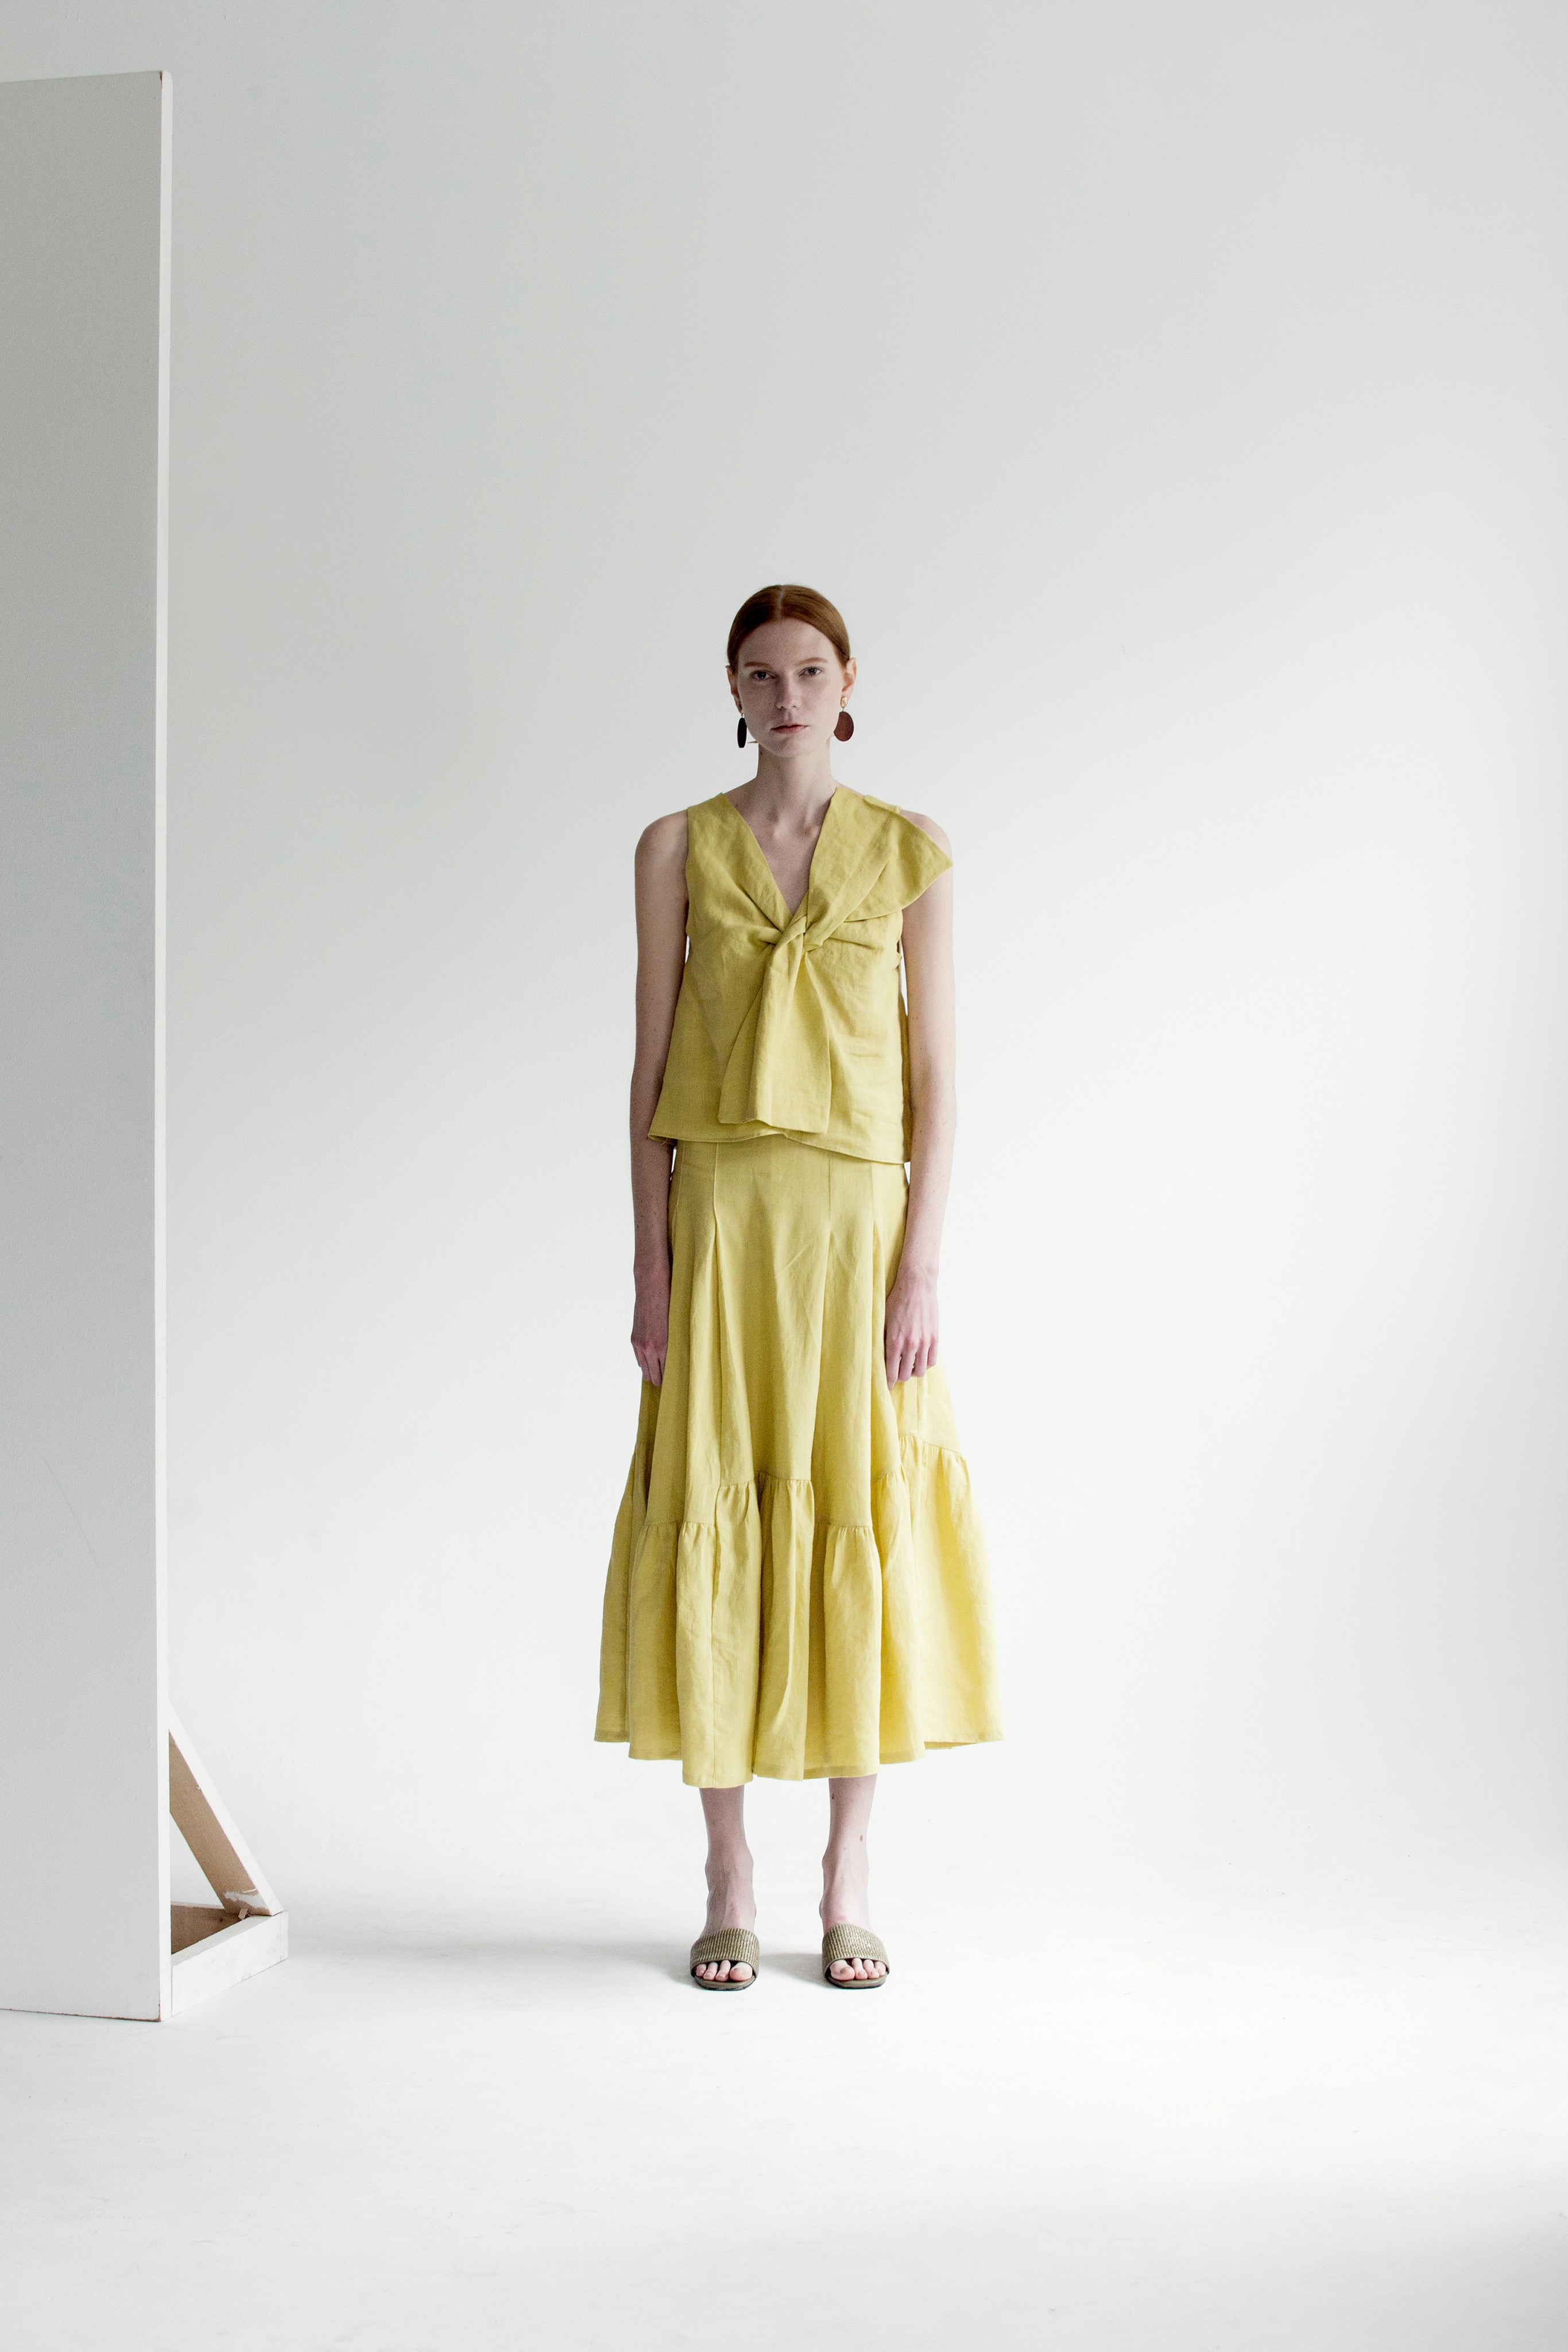 The Dhara Top in Chartreuse featuring sleeveless, V-neckline, front tuck detailing. Pull on.